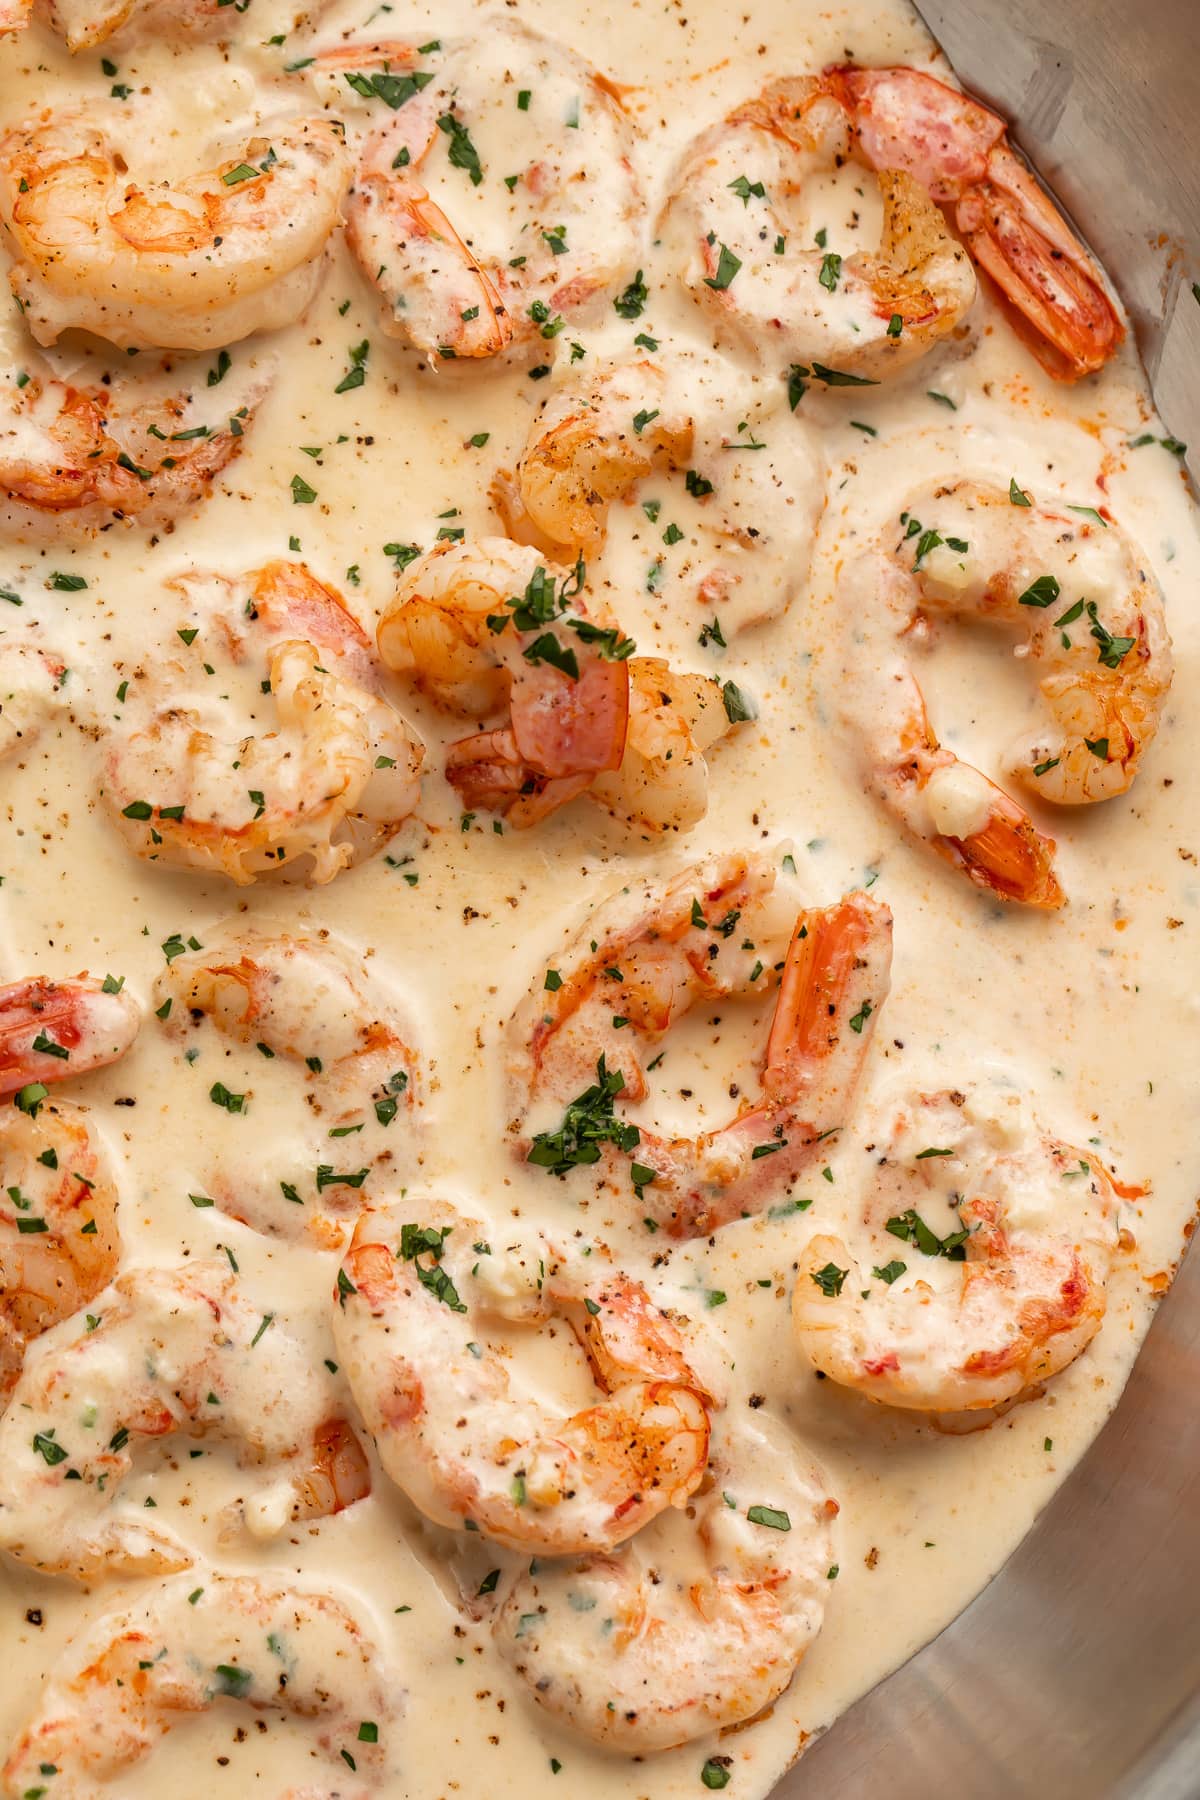 Cooked garlic shrimp in a rich cream sauce, in a large silver skillet.